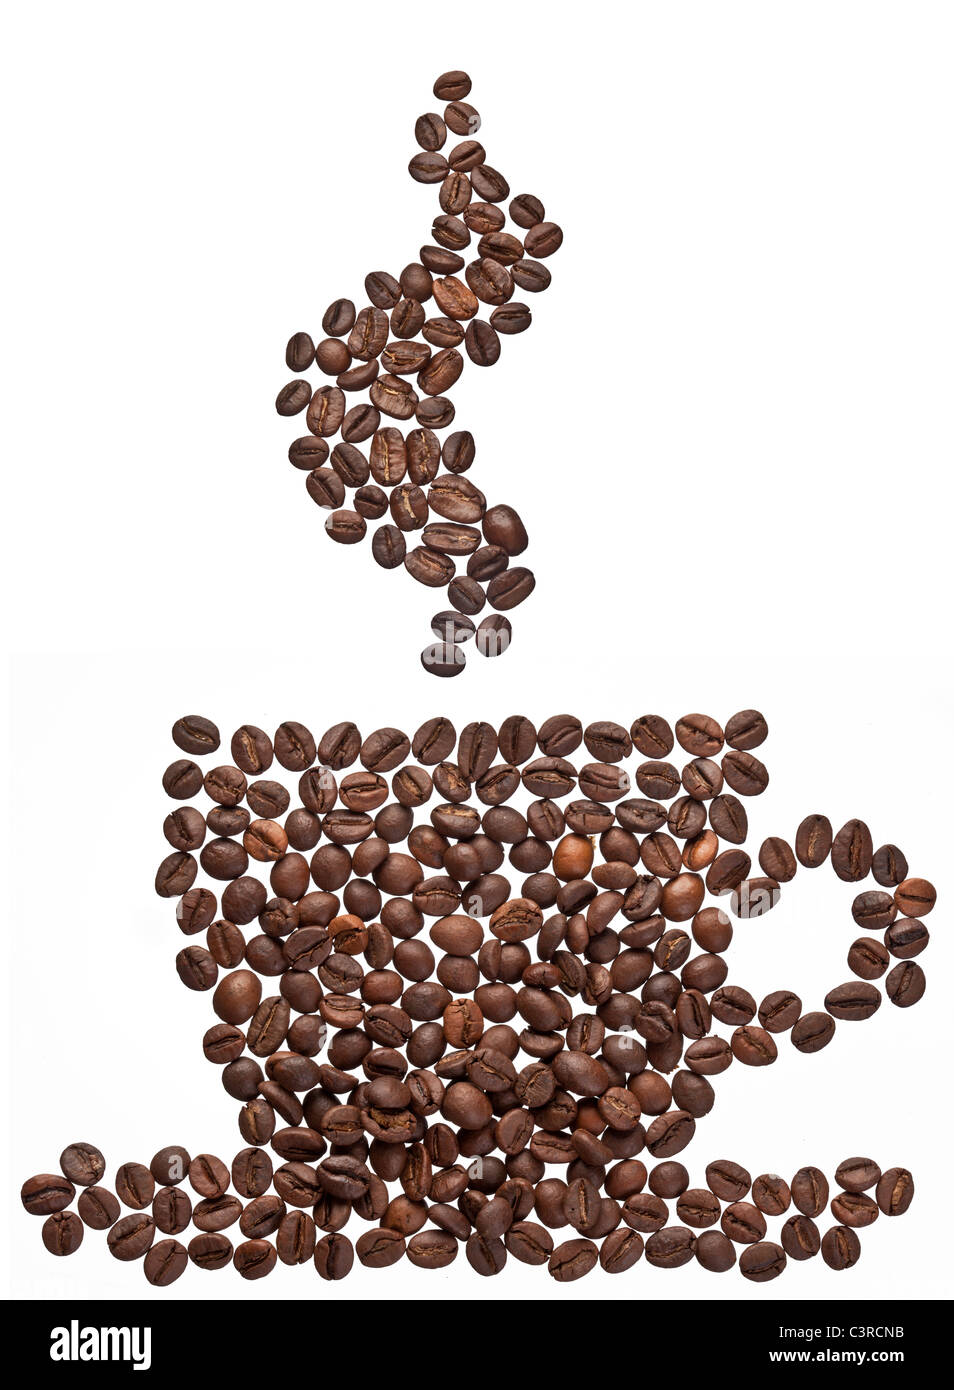 Coffee beans in the form of coffee cup and steam. Stock Photo